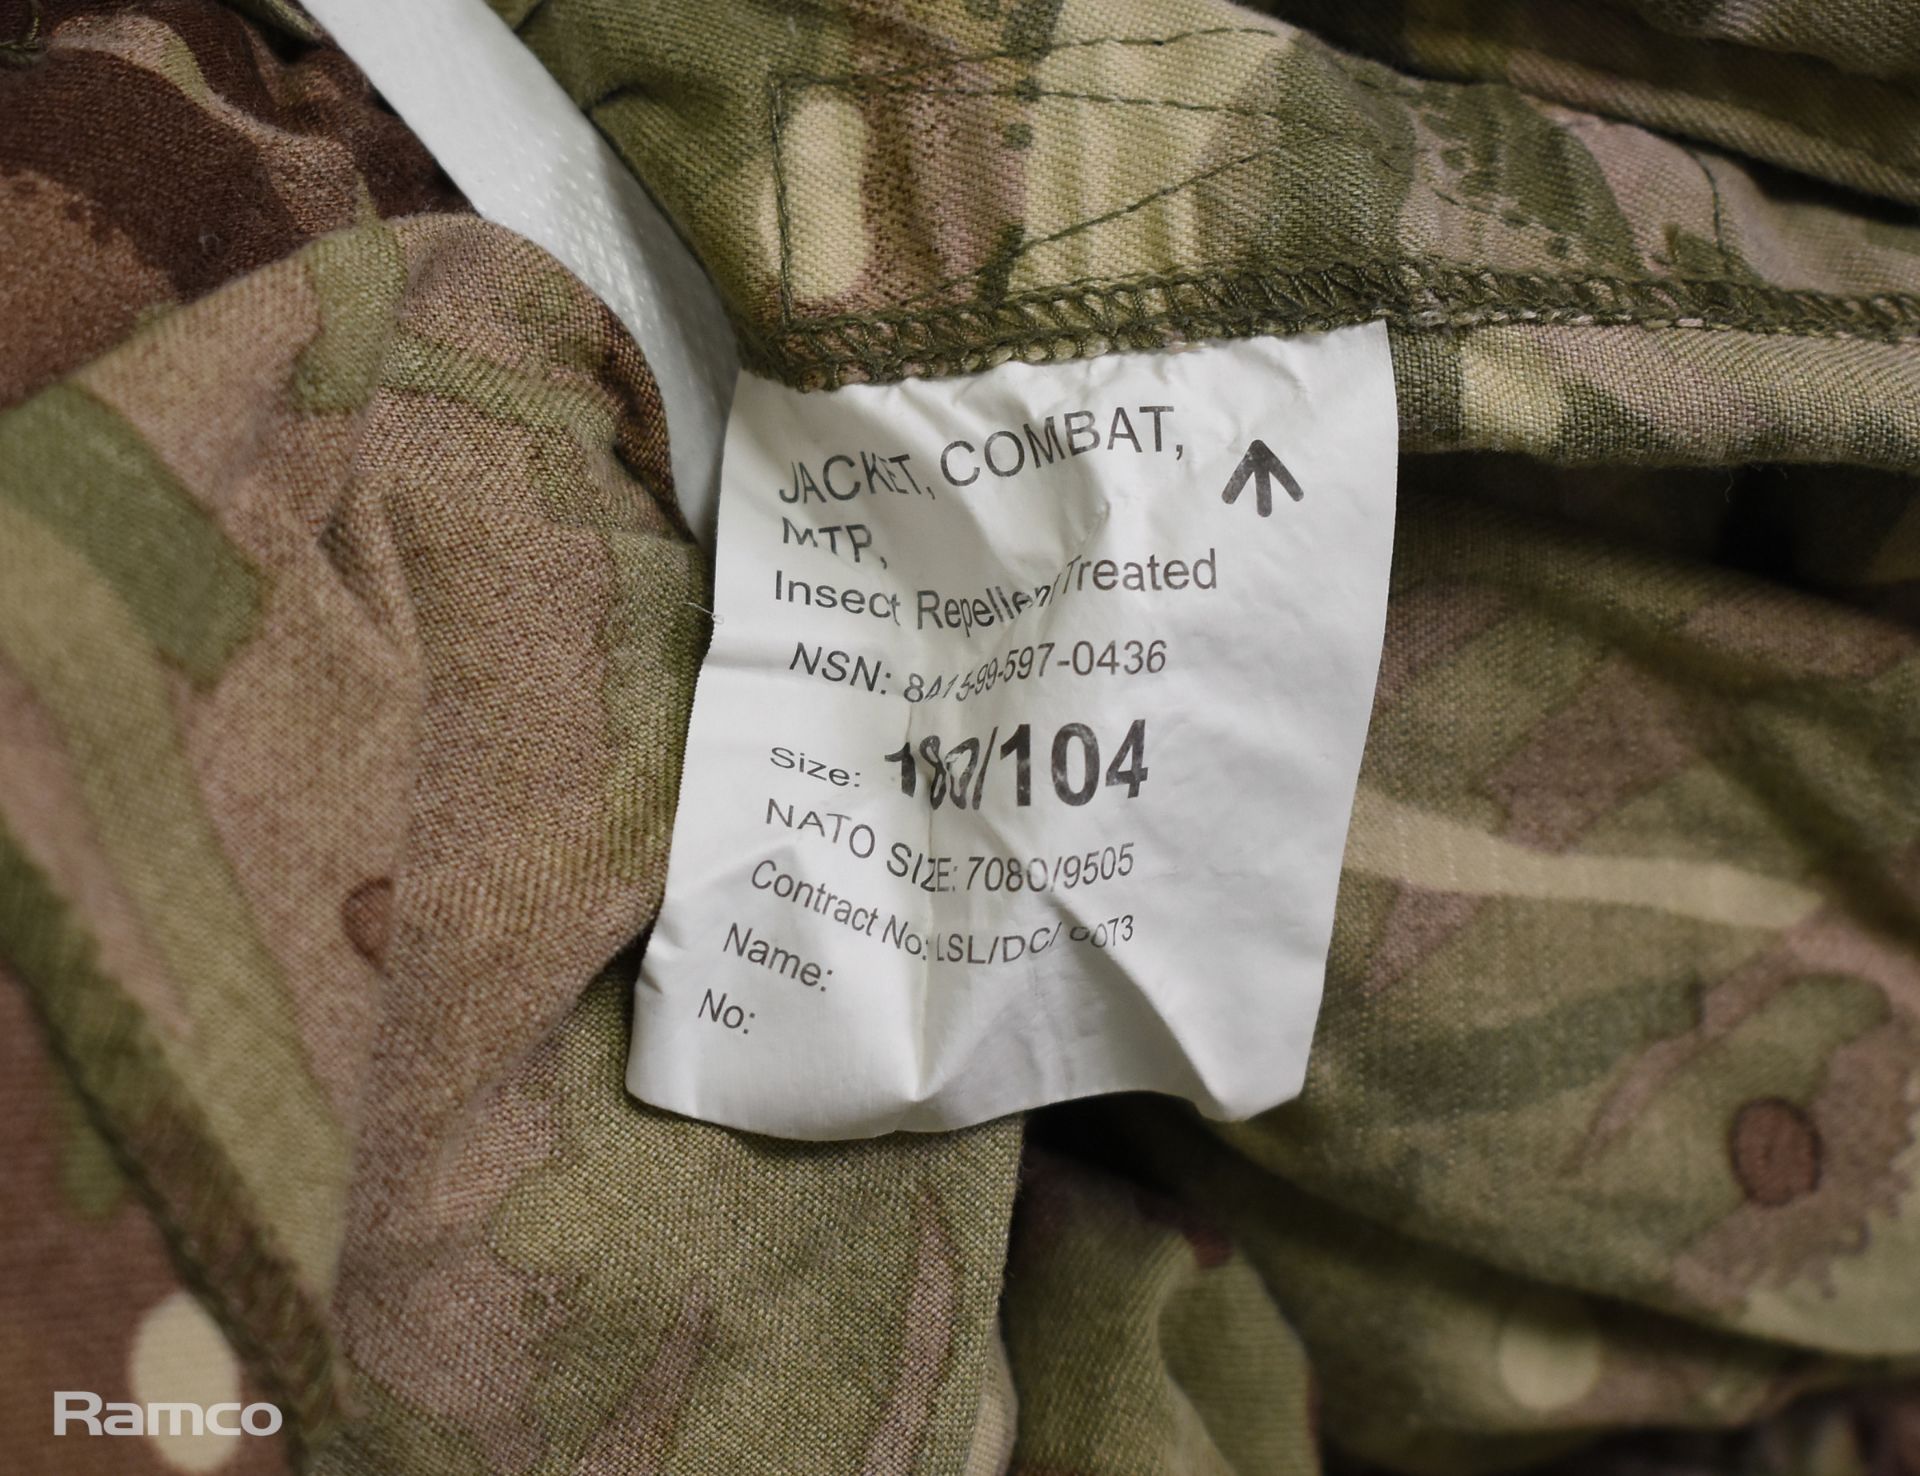 100x British Army MTP Combat jackets mixed styles - mixed grades and sizes - Image 13 of 16